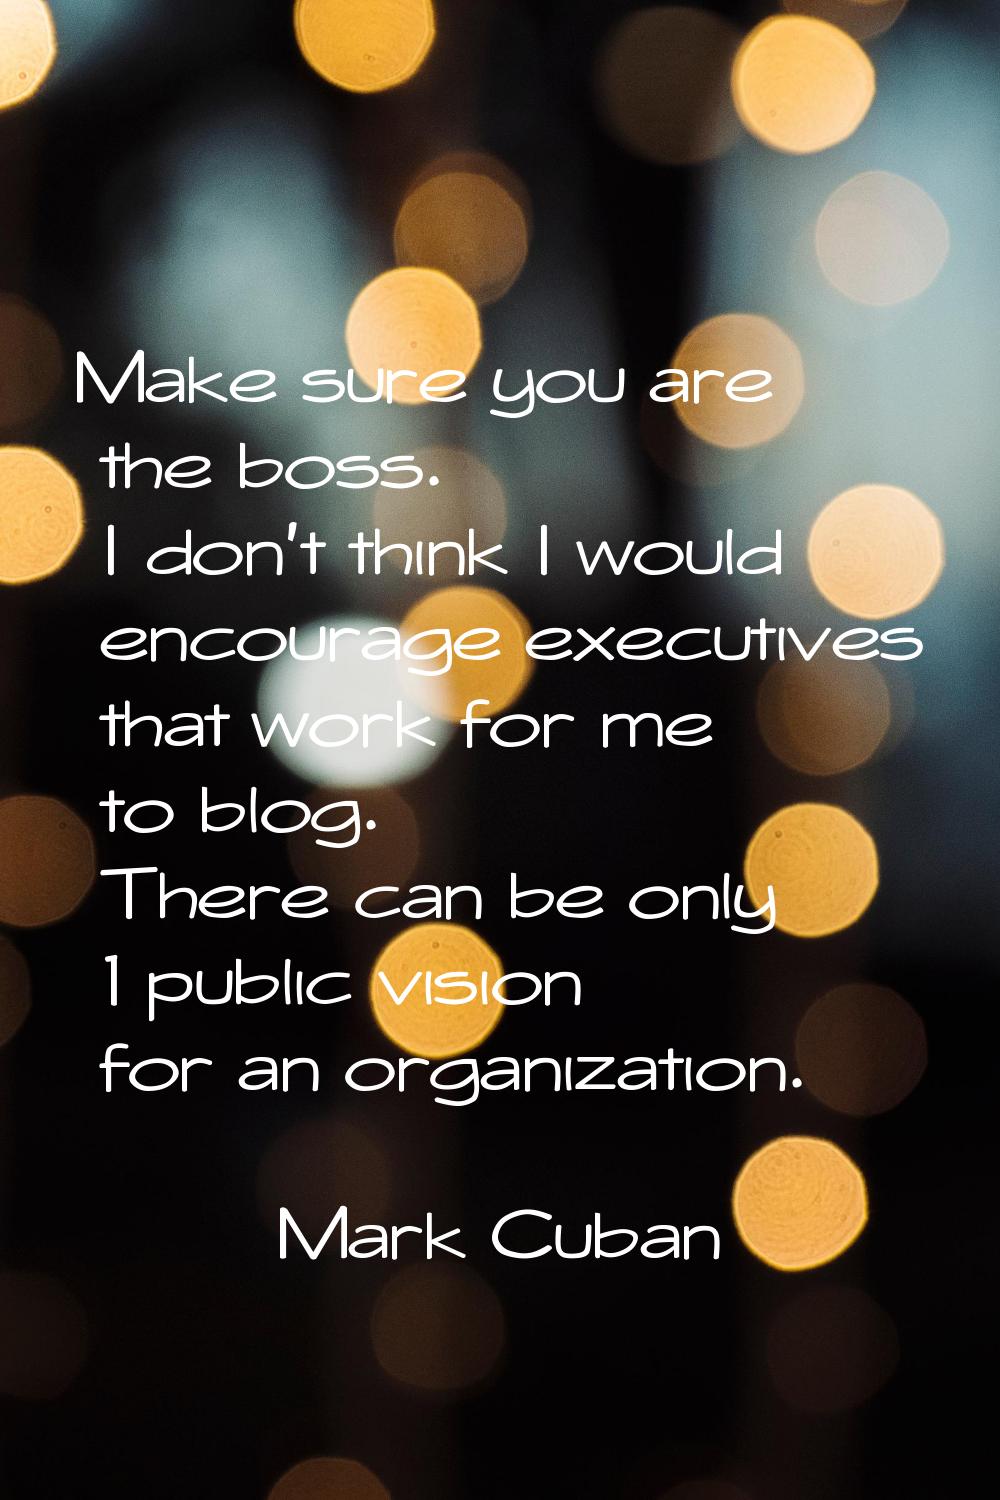 Make sure you are the boss. I don't think I would encourage executives that work for me to blog. Th